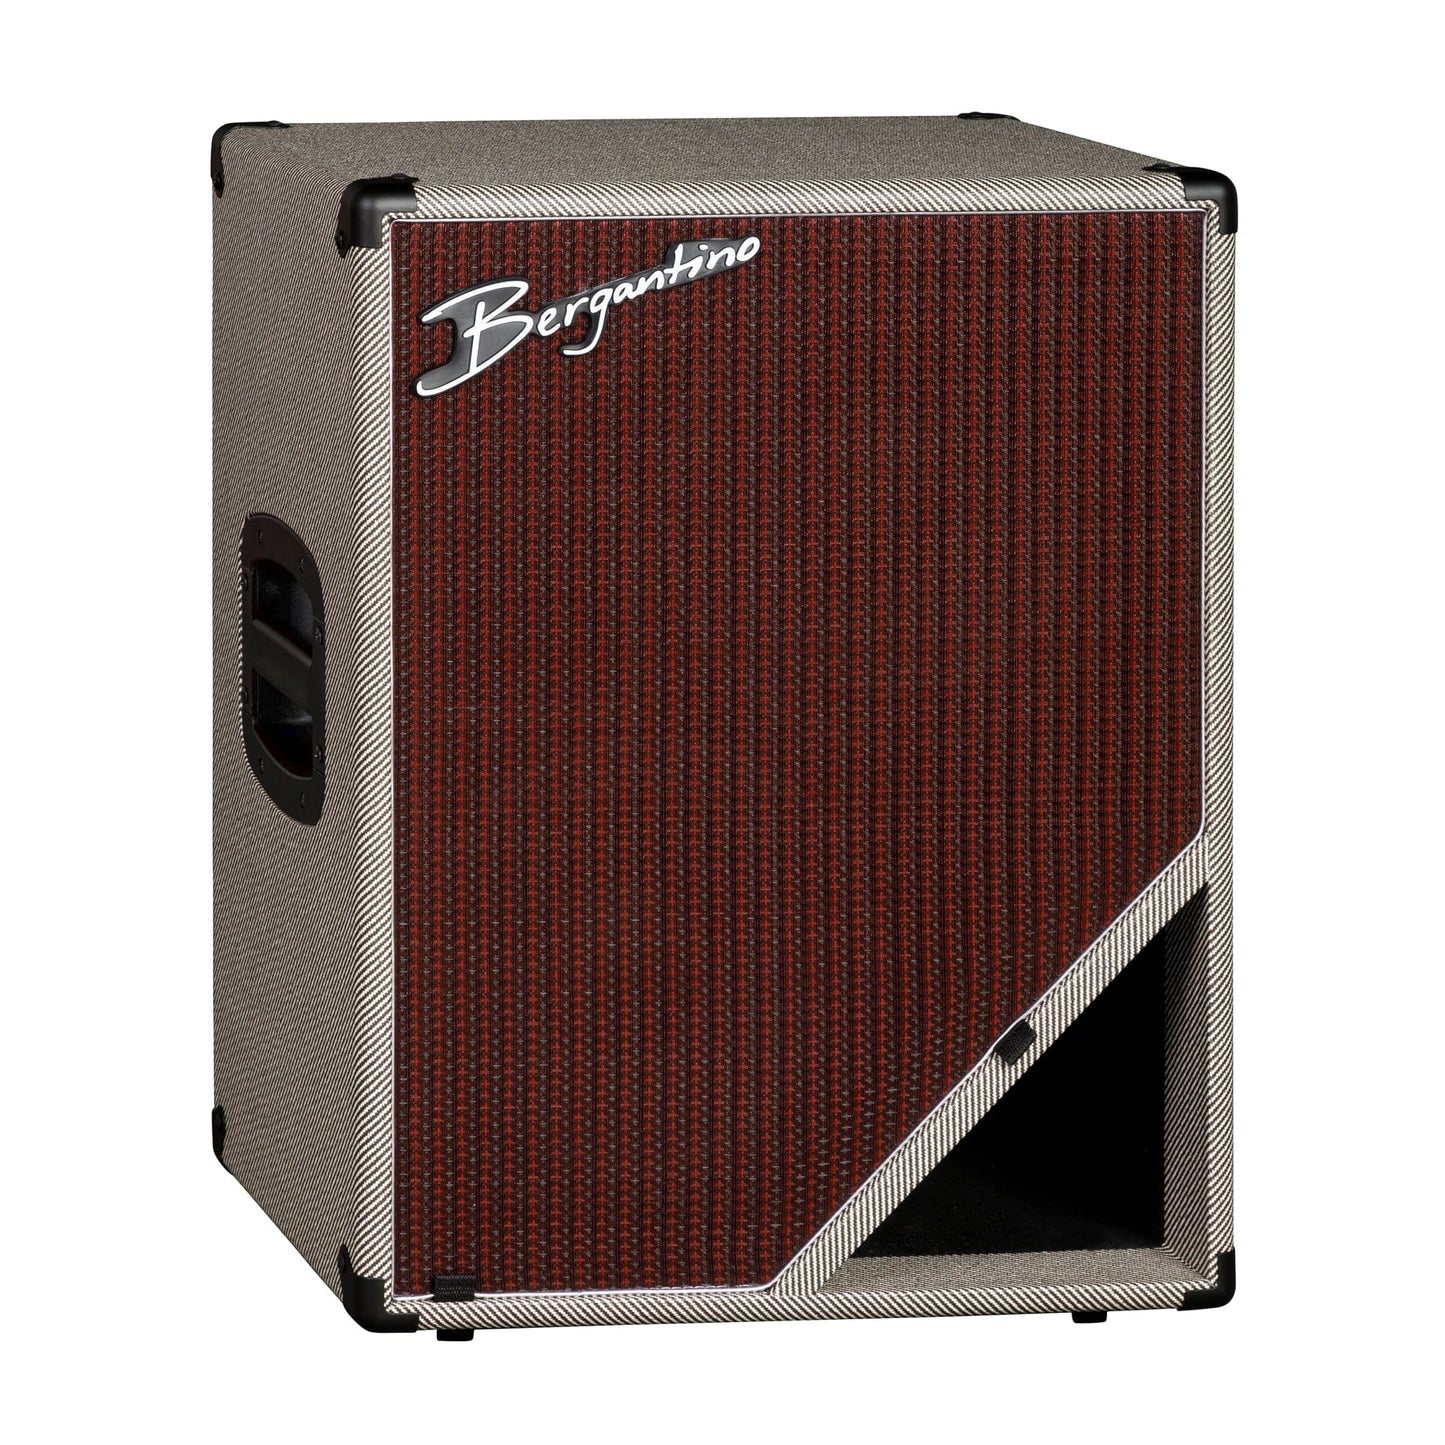 Bergantino NXTSE 210 Neo X-Treme Technology 2x10 Bass Cabinet Oyster Tweed w/ Oxblood Grill Amps / Bass Cabinets